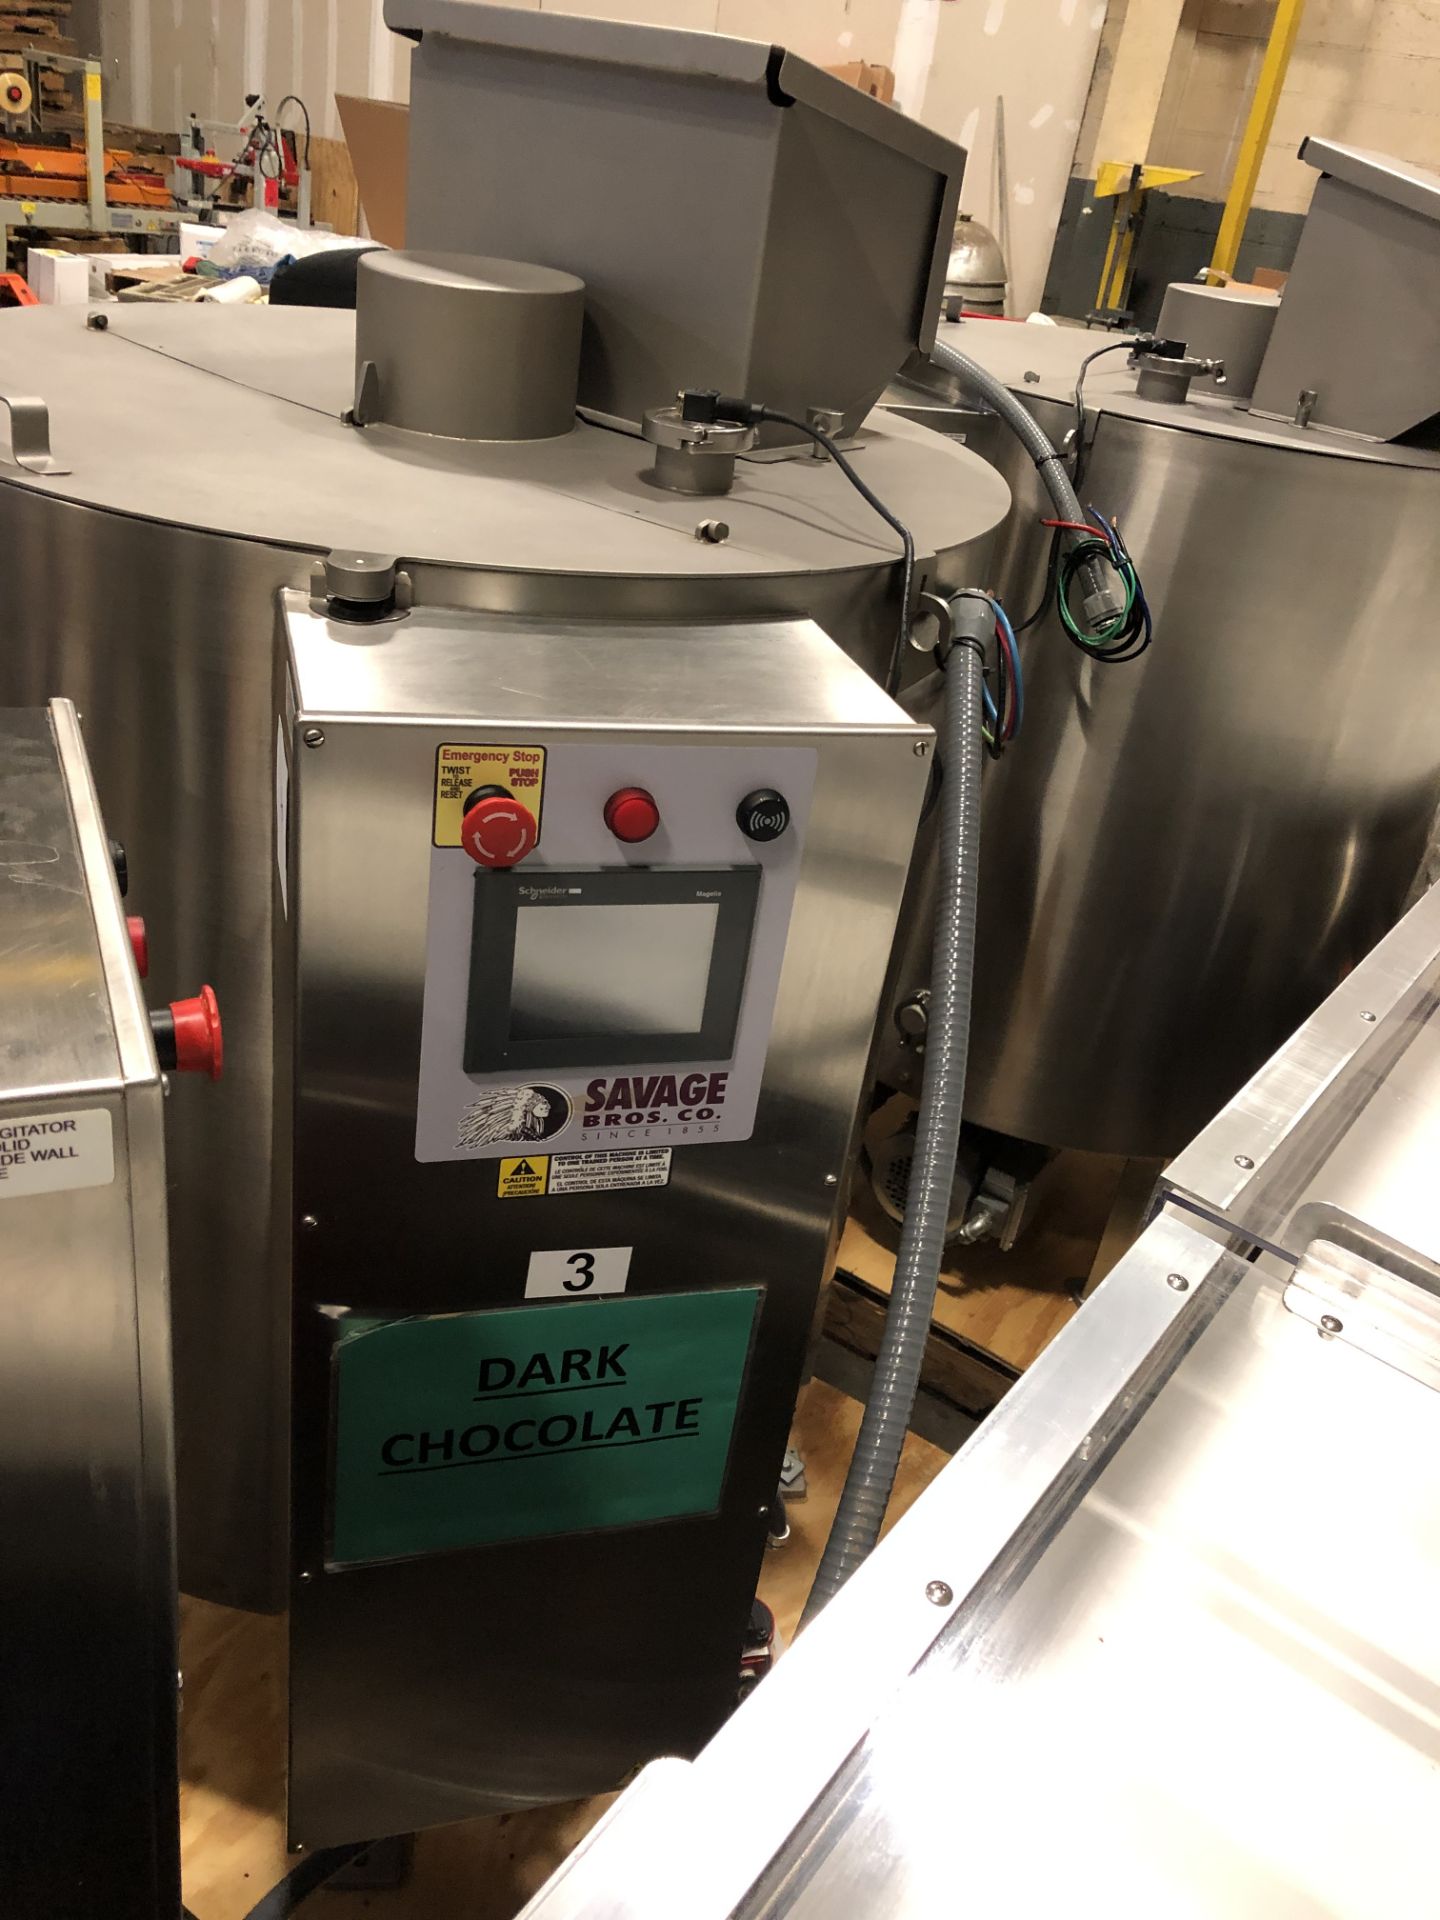 Savage Stainless Steel 1250-lb Chocolate Melter, model 0974-36, with PLC touchscreen controls,